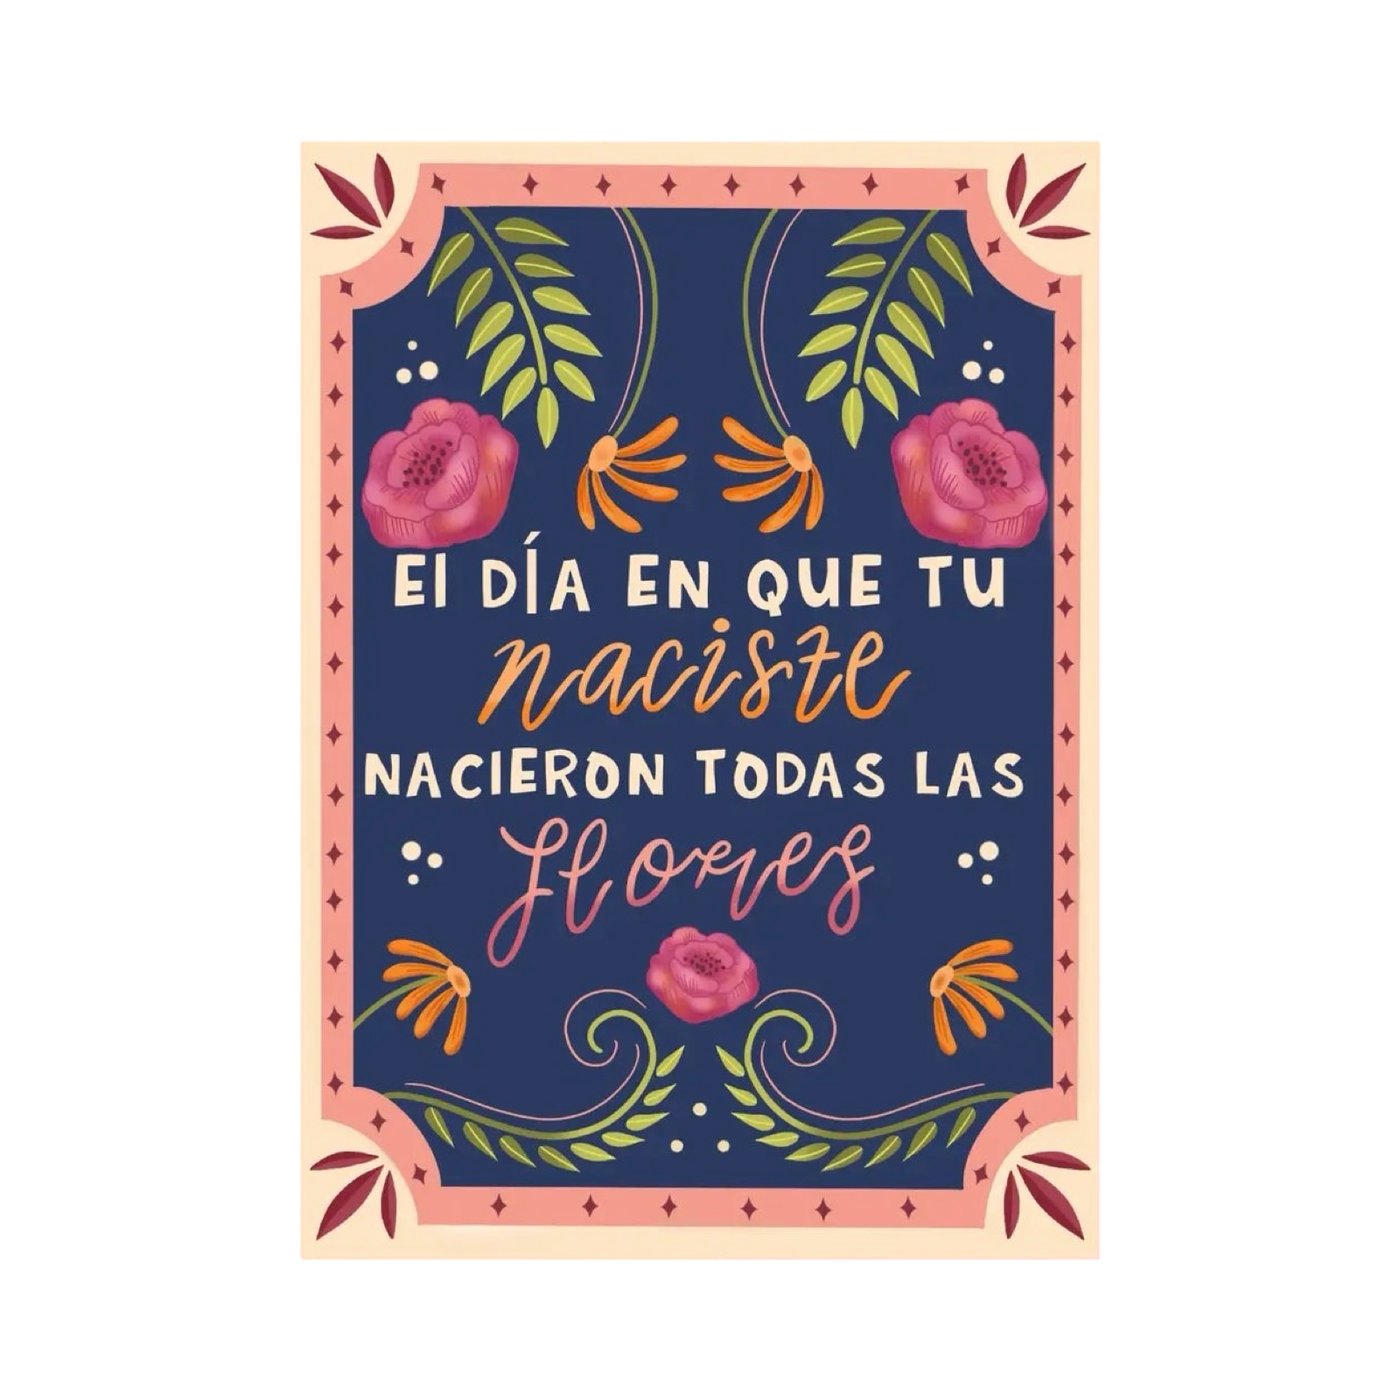 navy blue card with a pink and peach border with the saying "El Dia En Que Tu Naciste,Nacieron Todas Las Flores," in various colored lettering and features flowers and foliage.